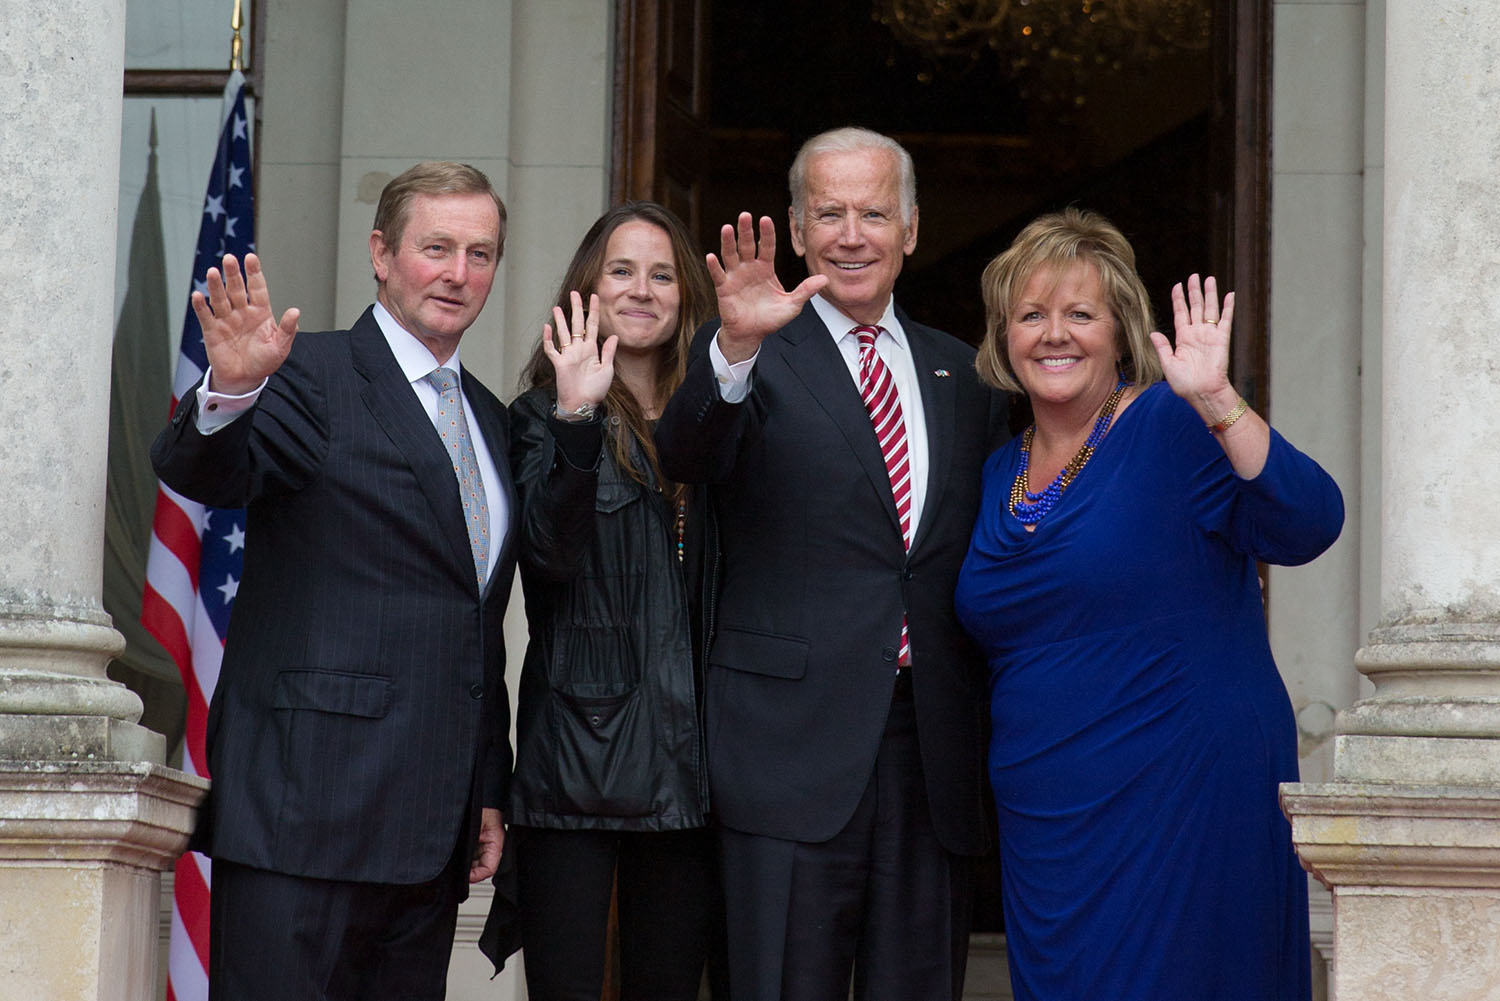 Taoiseach Enda Kenny, Ashley Biden, Vice President Joe Biden, and Mrs. Fionnuala O'Kelly wave to the press after a luncheon at hosted by the Taoiseach at Farmleigh House, in Dublin, Ireland, June 26, 2016. (Official White House Photo by David Lienemann)